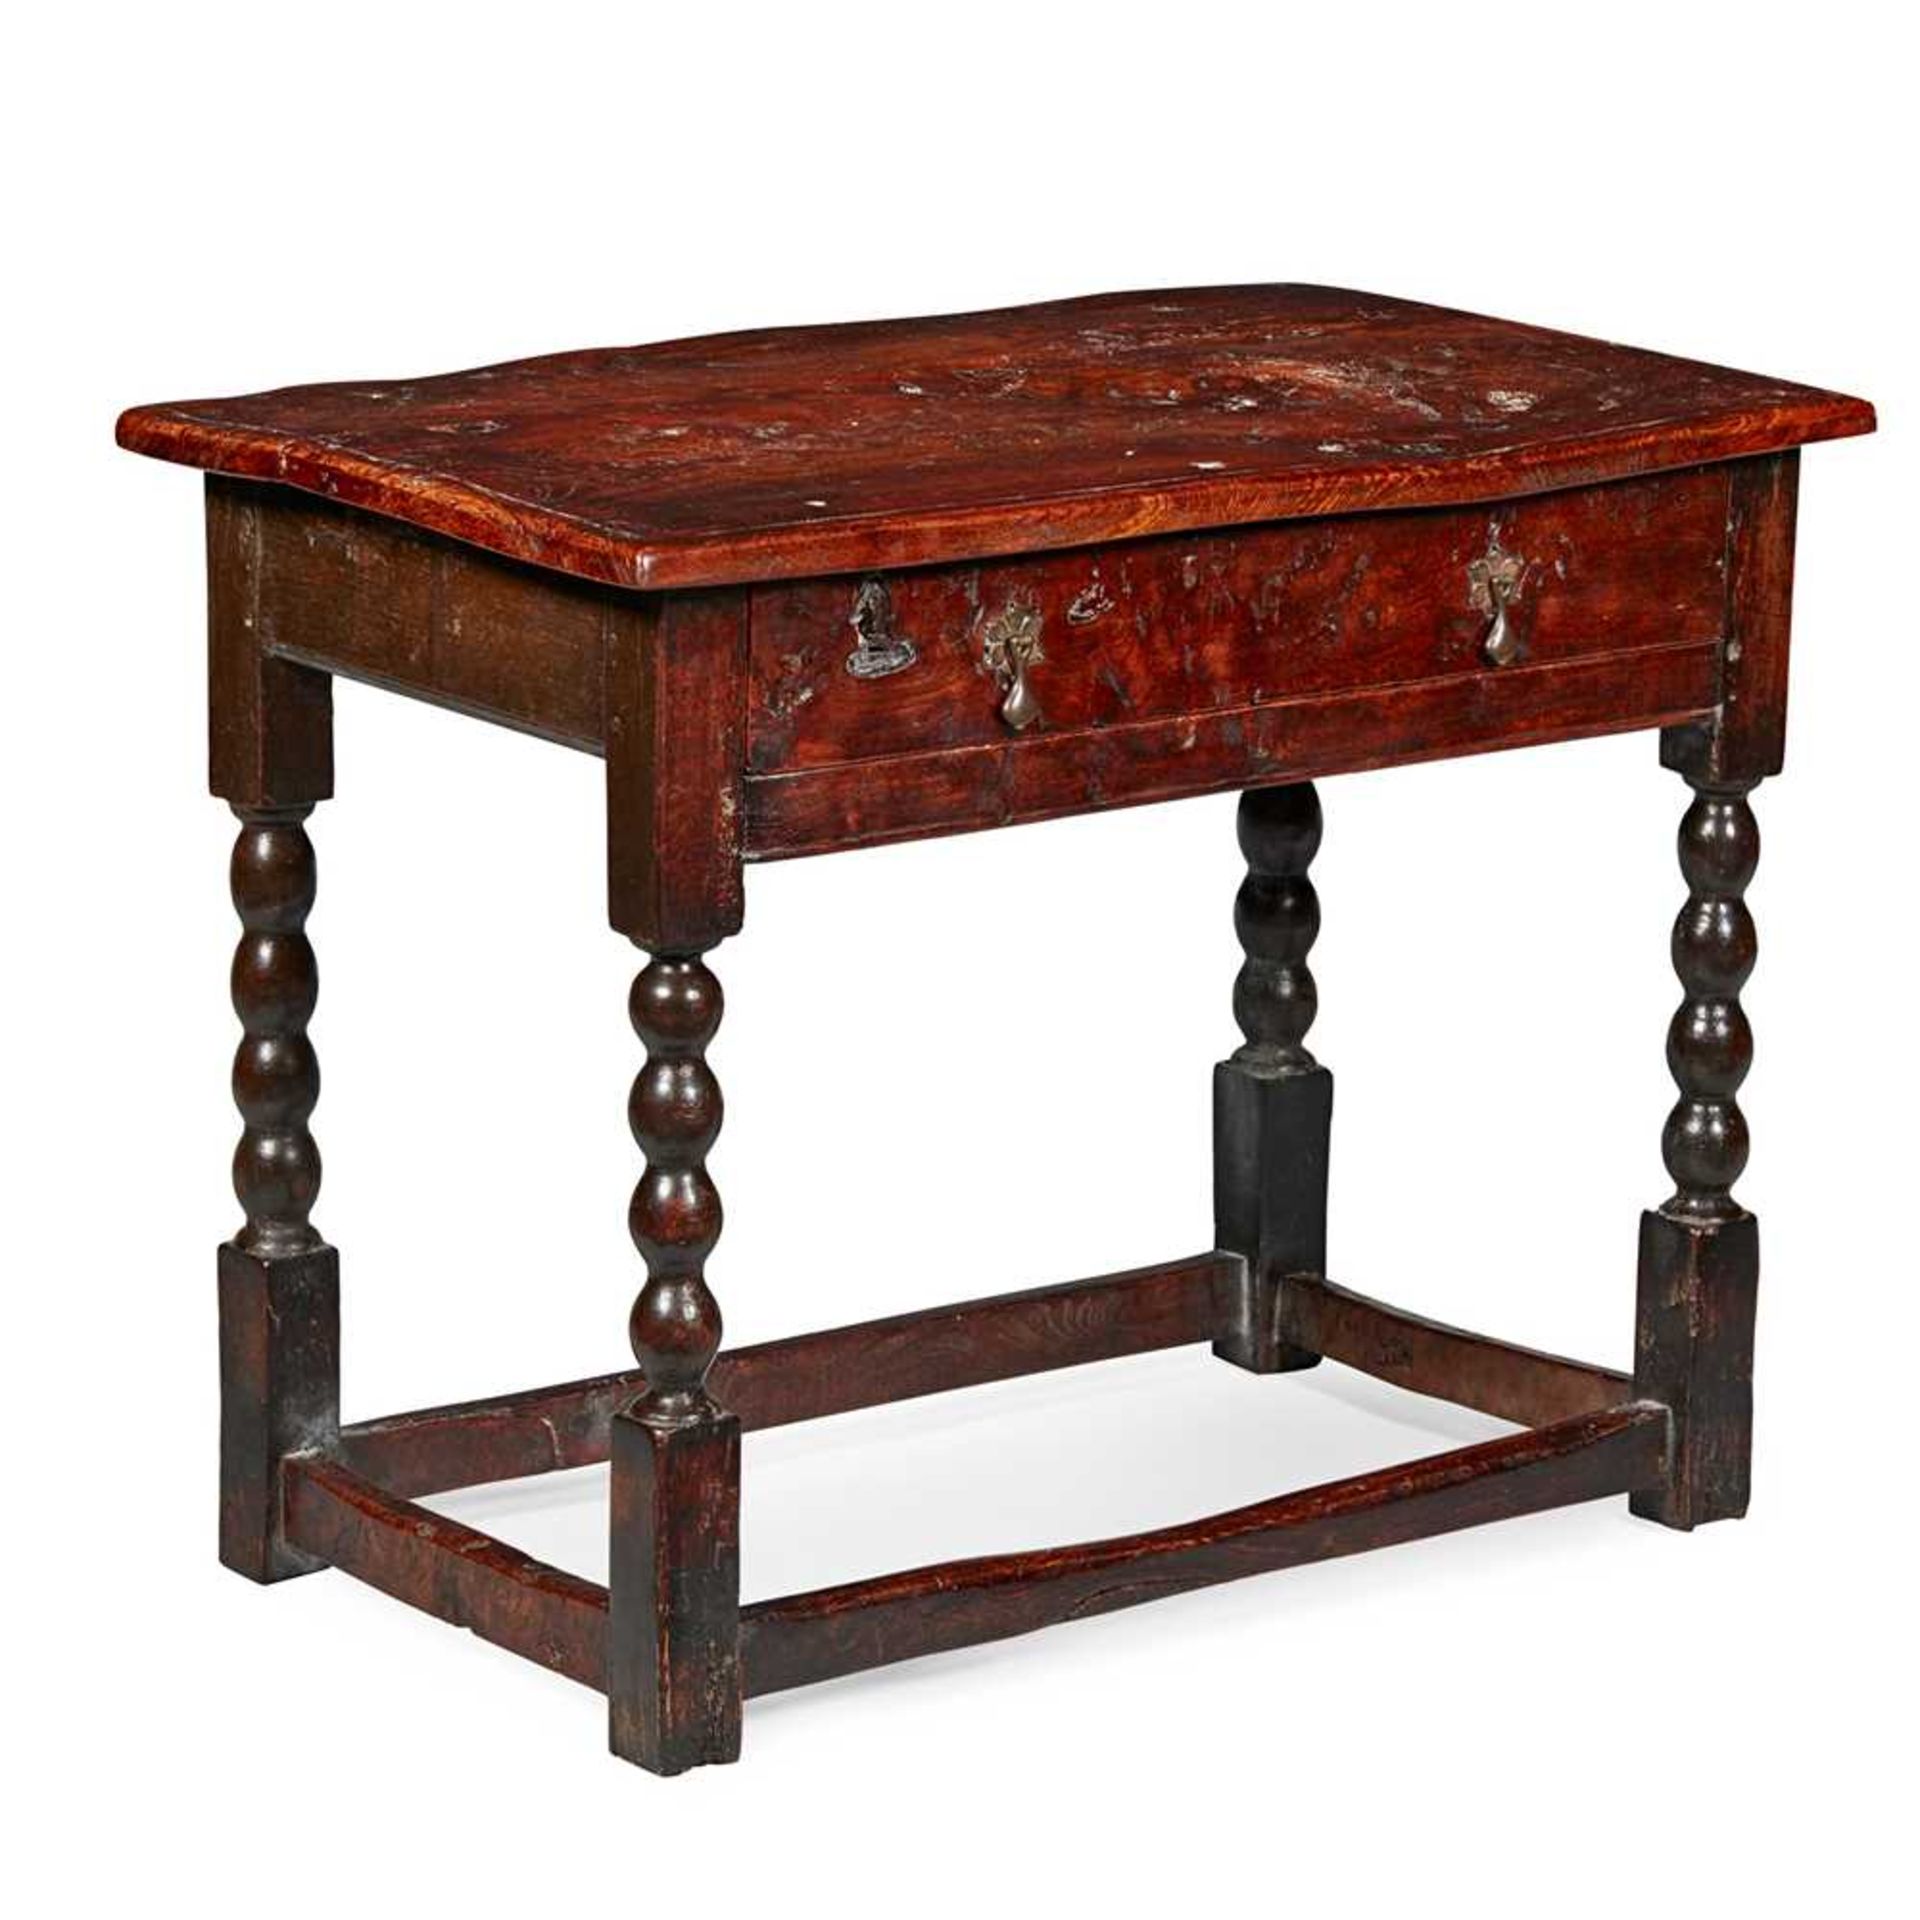 WILLIAM AND MARY OAK AND ELM SIDE TABLE LATE 17TH/ EARLY 18TH CENTURY